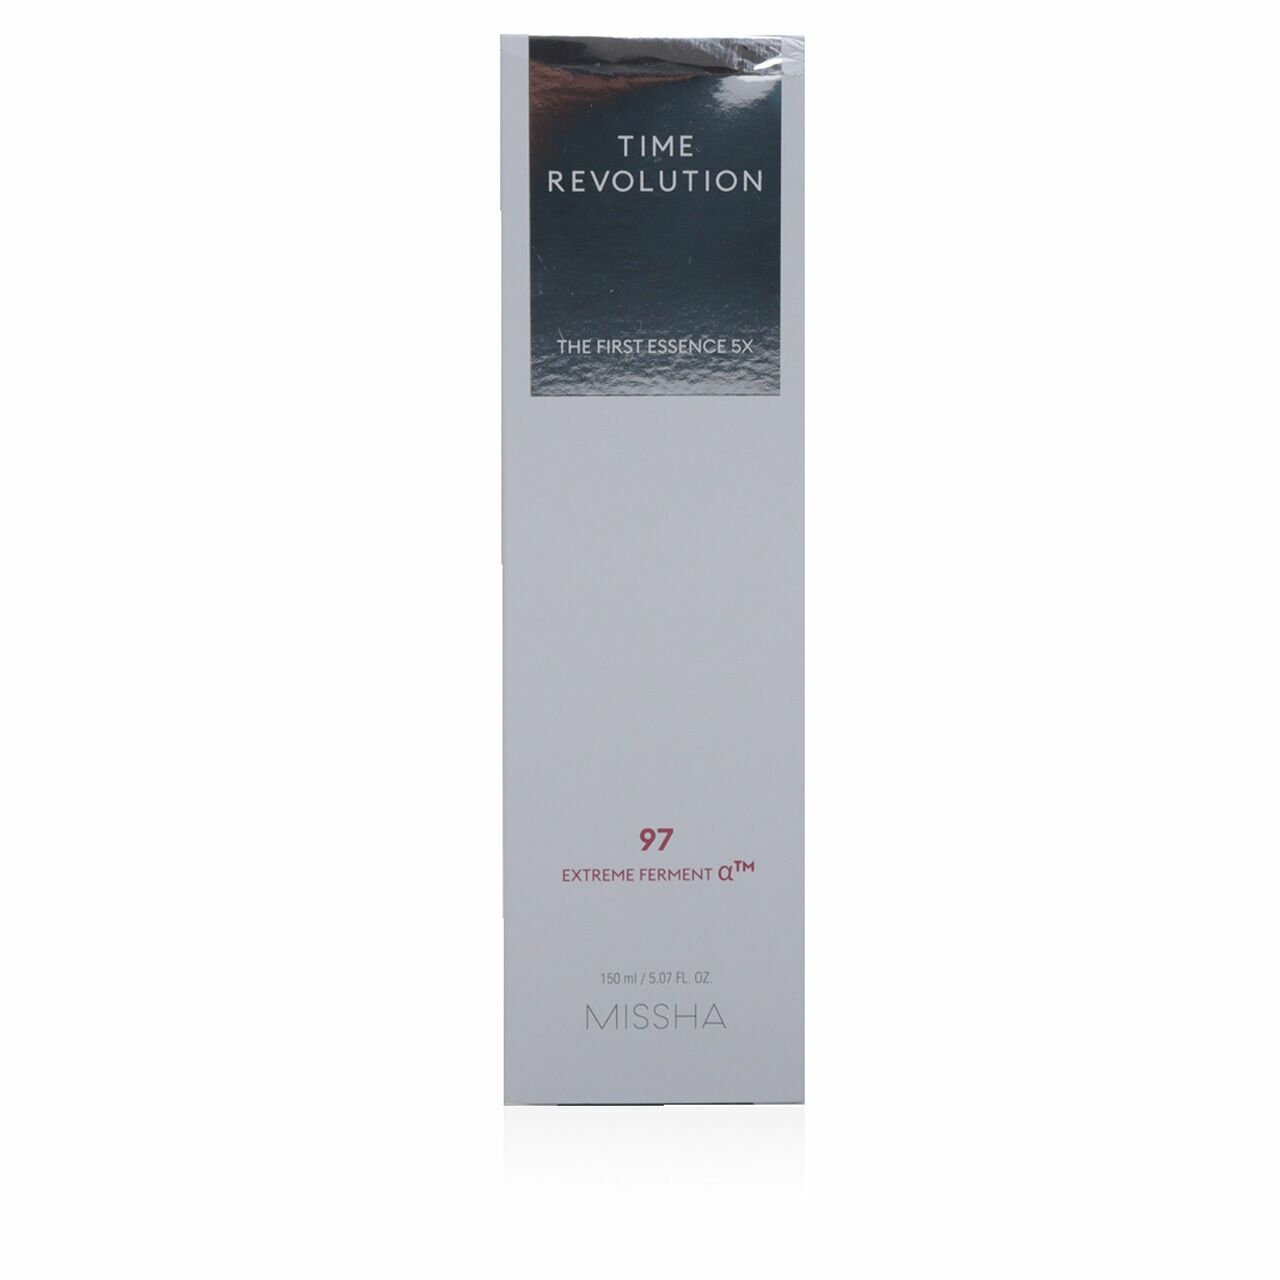 Private Collection Missha Time Revolution The First Essence 5x Skin Care